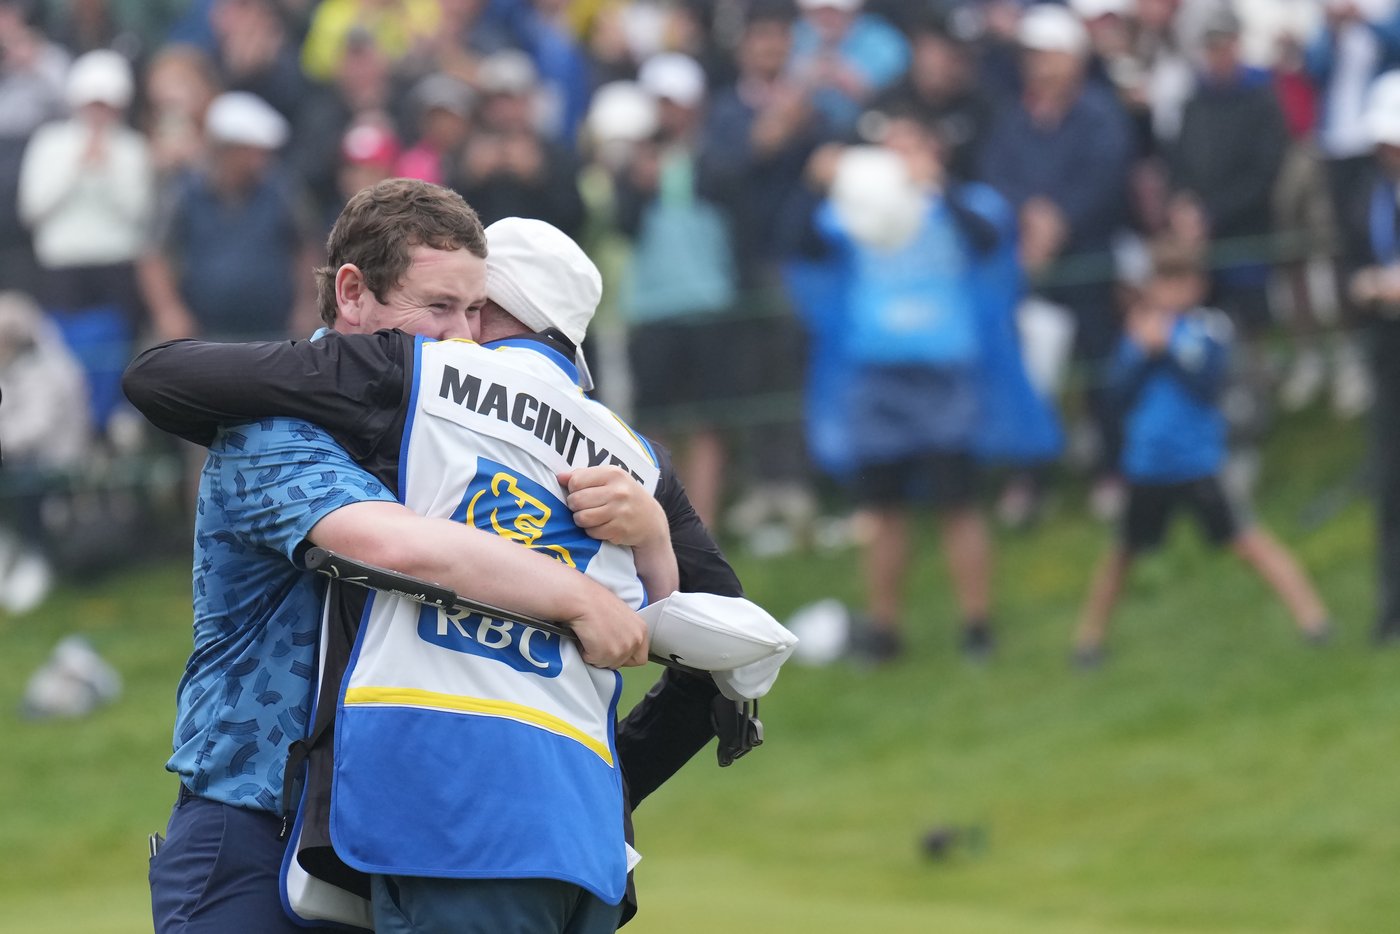 Scotland’s Robert MacIntyre holds off Griffin to win RBC Canadian Open